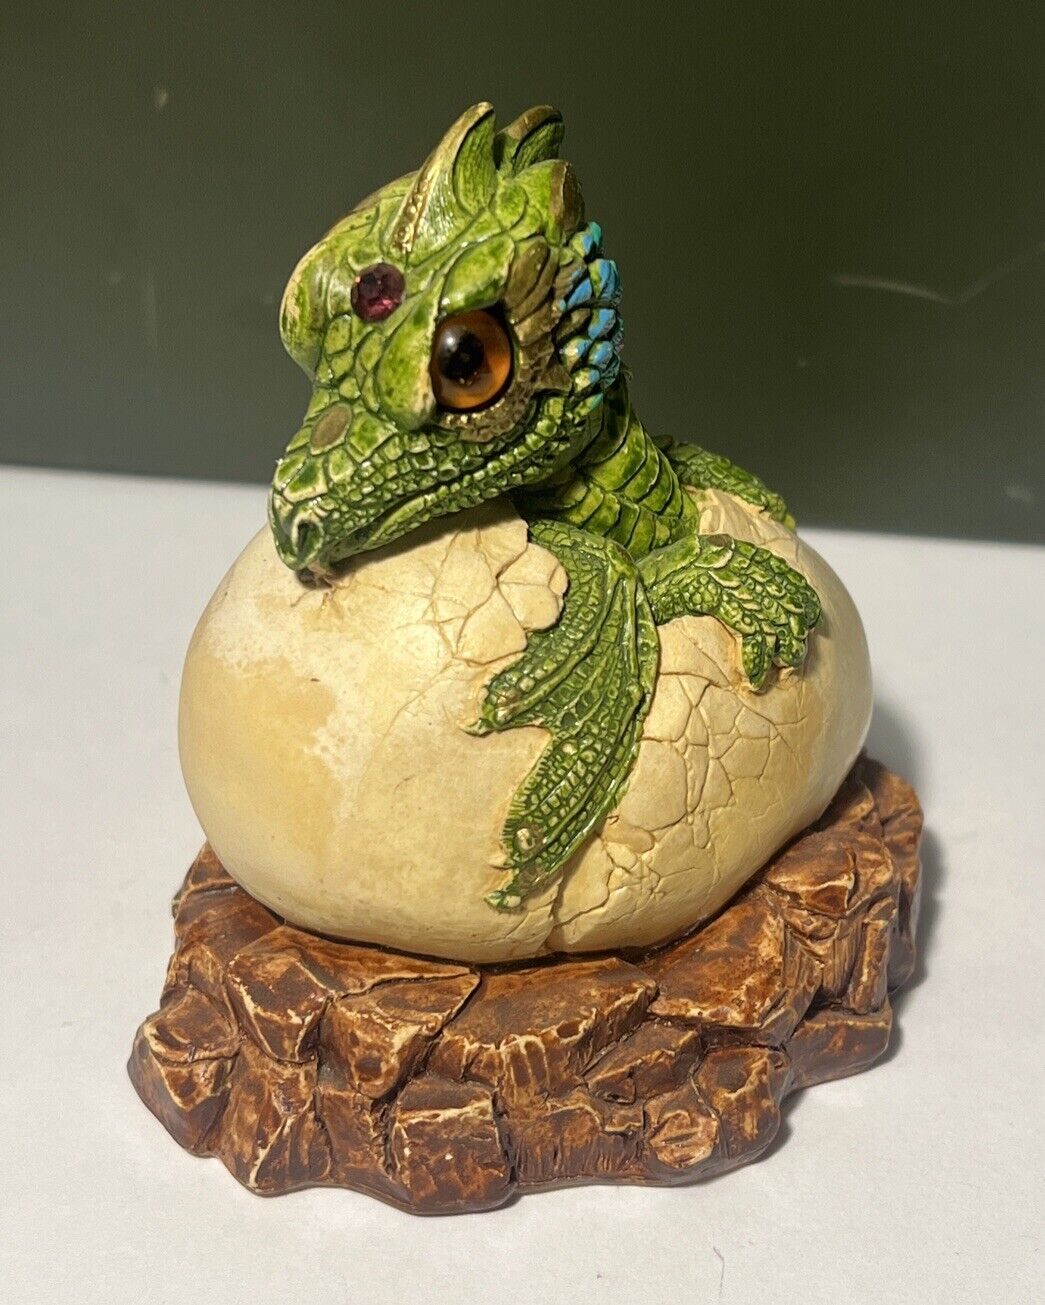 1984 Hatching Baby Dragon Egg Fantasy Windstone Editions, Retired Pena 84